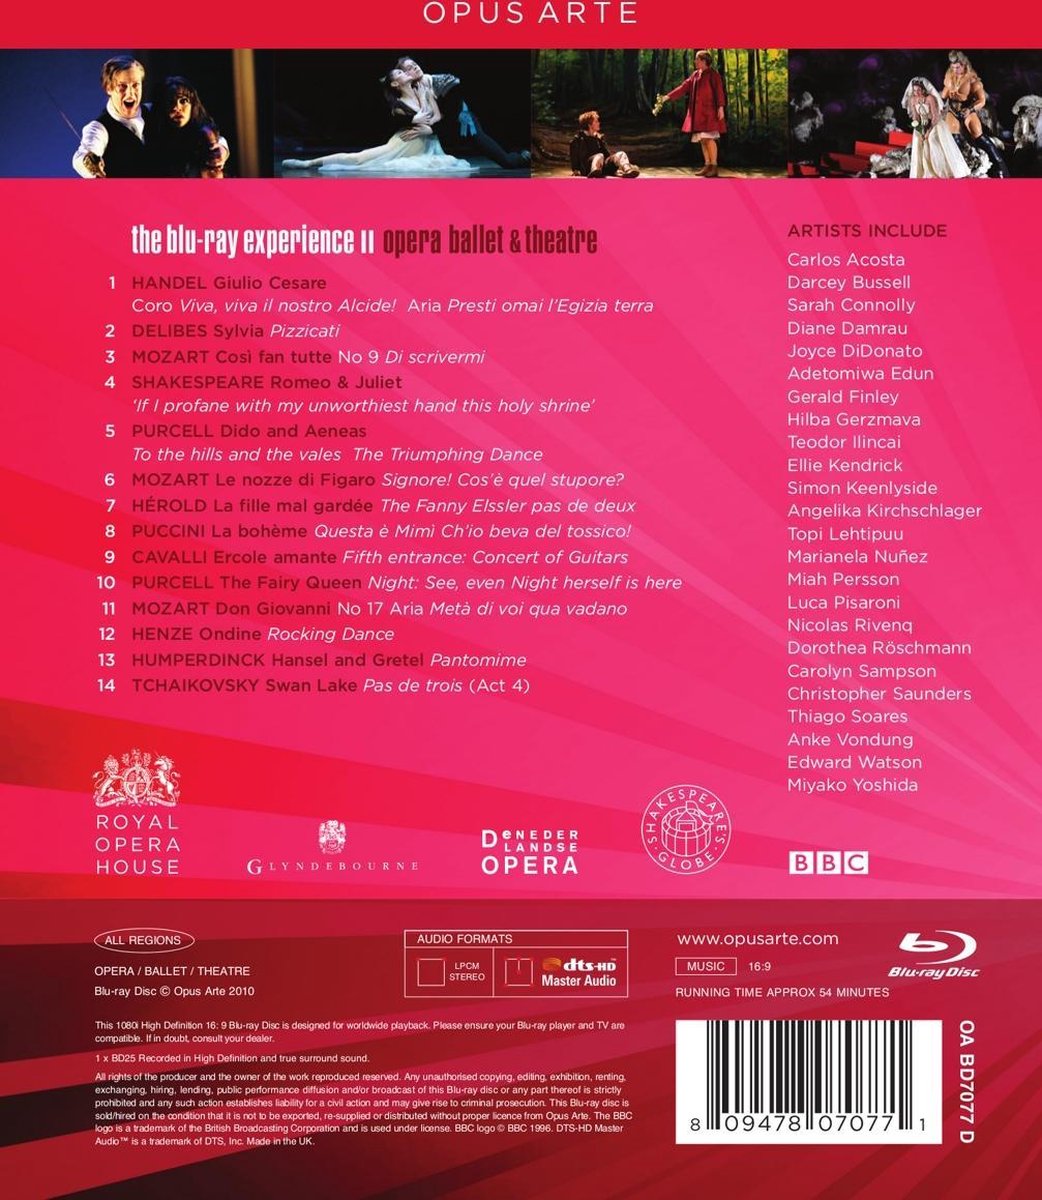 Opera, Ballet & Theatre - Blu-ray Disc | The Orchestra of the Royal Opera House, Carlos Acosta, Darcey Bussell, Sarah Connolly